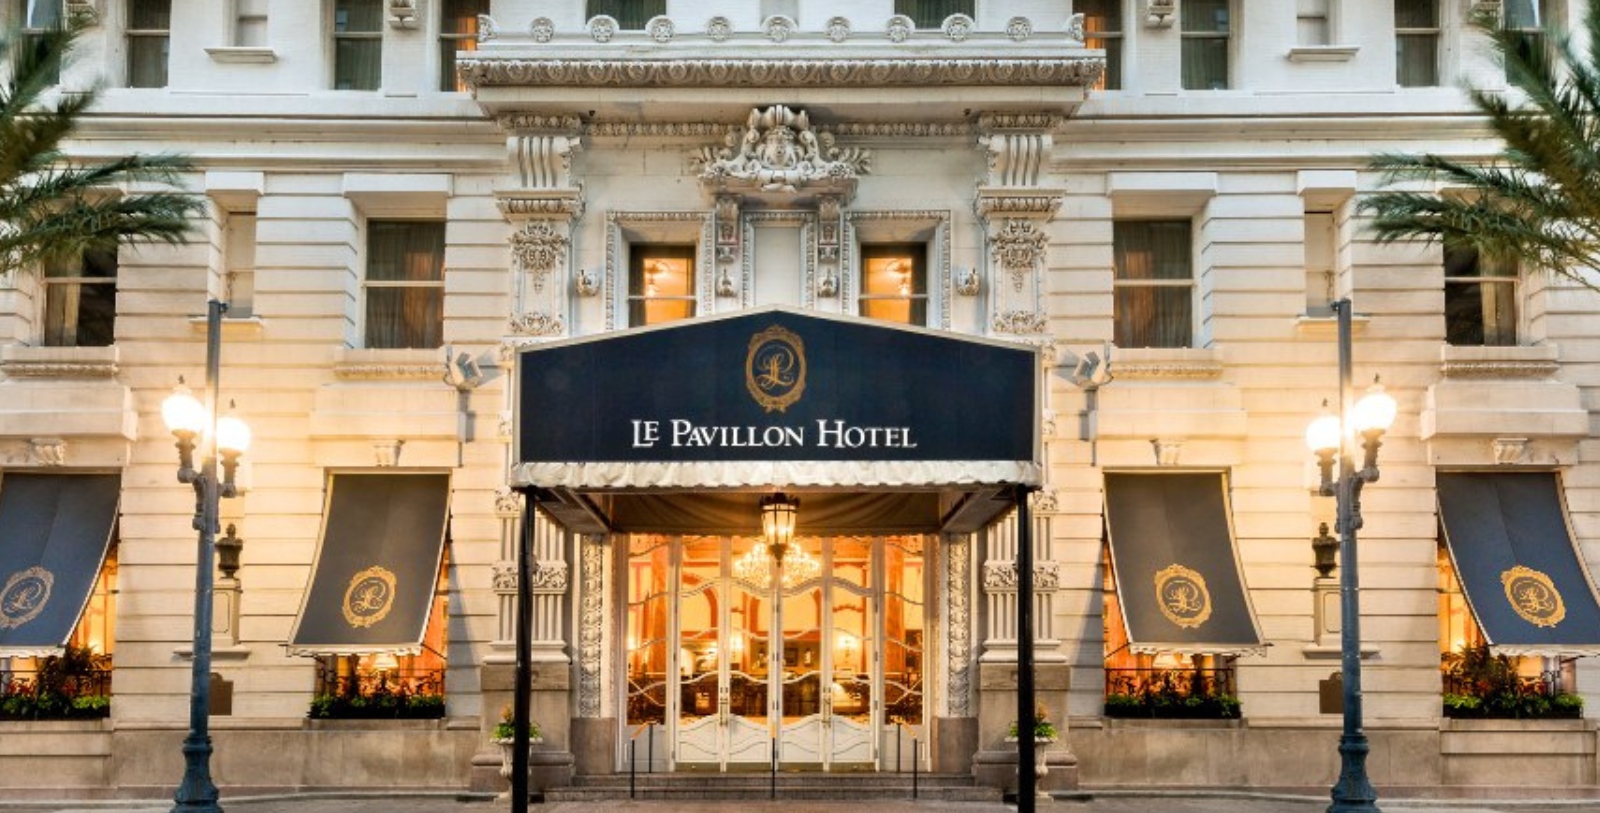 Image of Le Pavillon Hotel in New Orleans, Louisiana